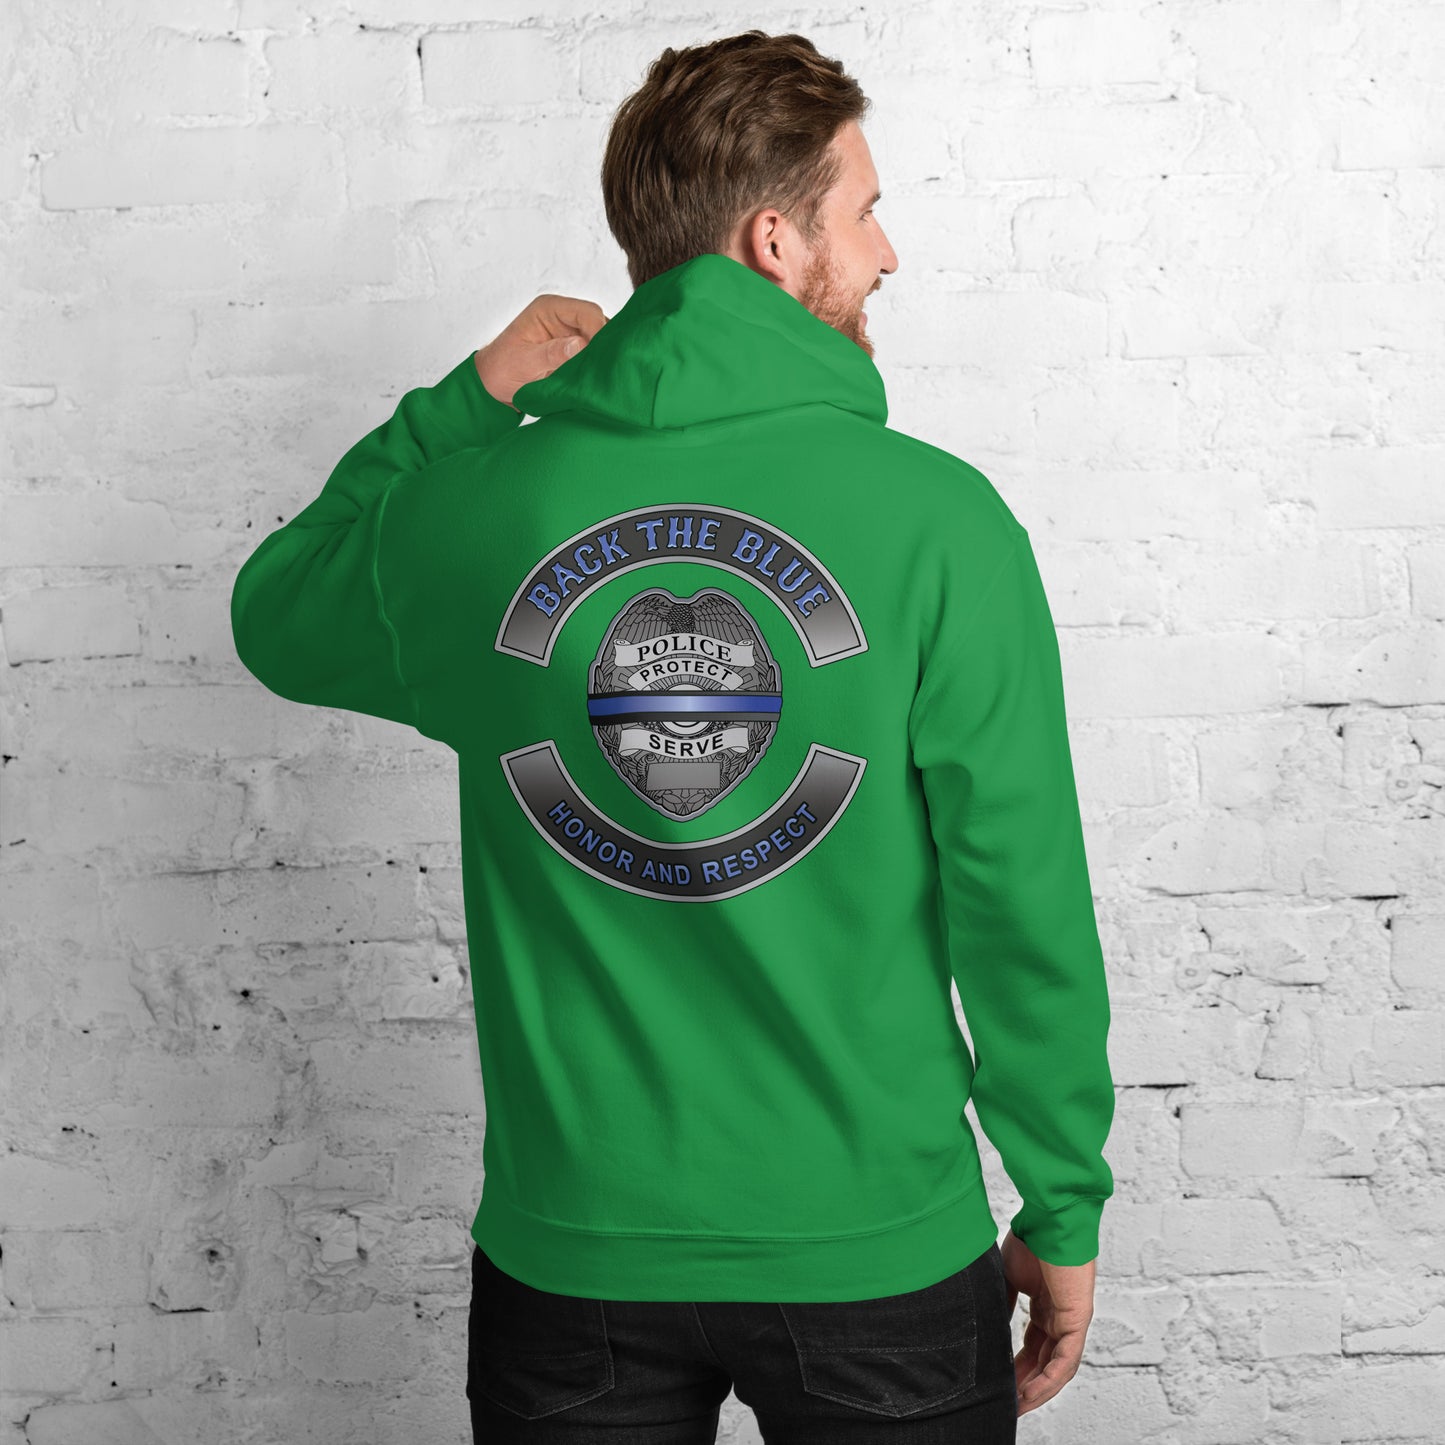 Back The Blue Honor And Respect Thin Blue Line Gildan Hoodie